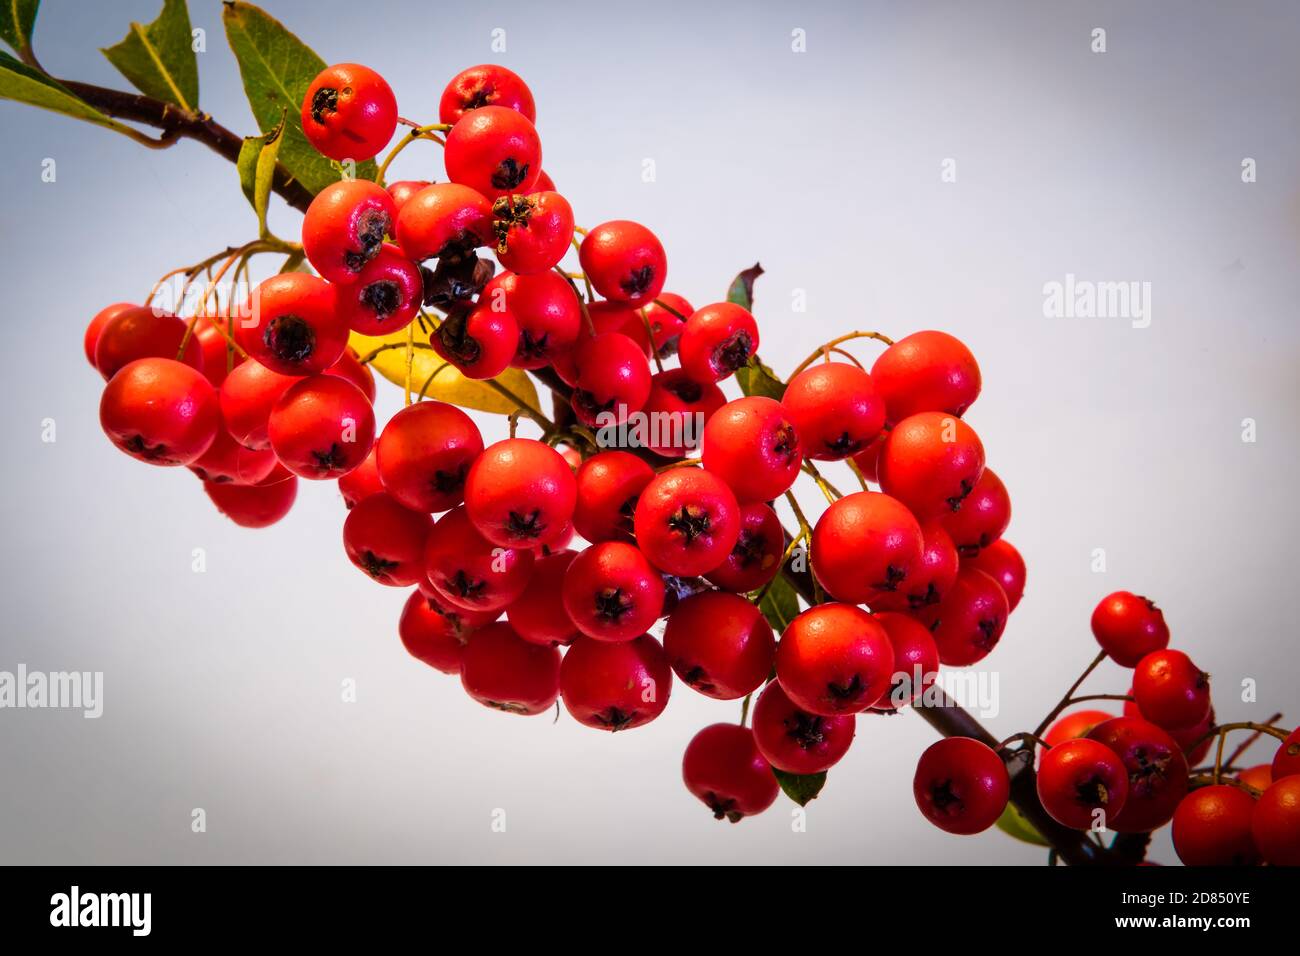 Pyracantha 'Darts Red', growing in a counry garden. Stock Photo